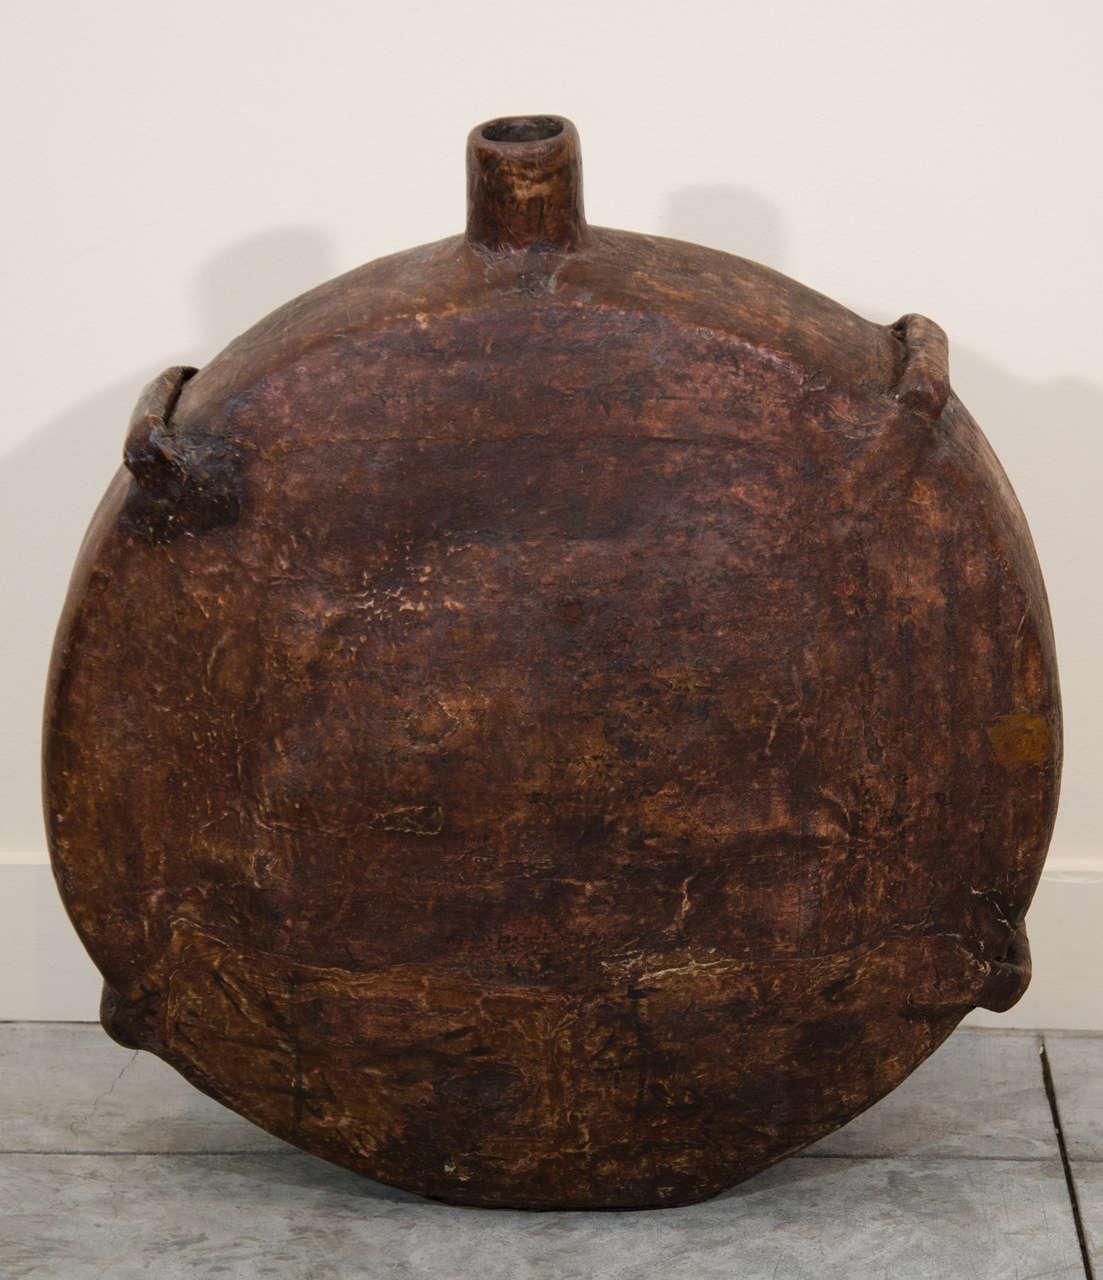 A striking antique Chinese oil container nearly 20 inches in circumference with a wonderful patina. From Shanxi Province, circa 1900.
M777.
